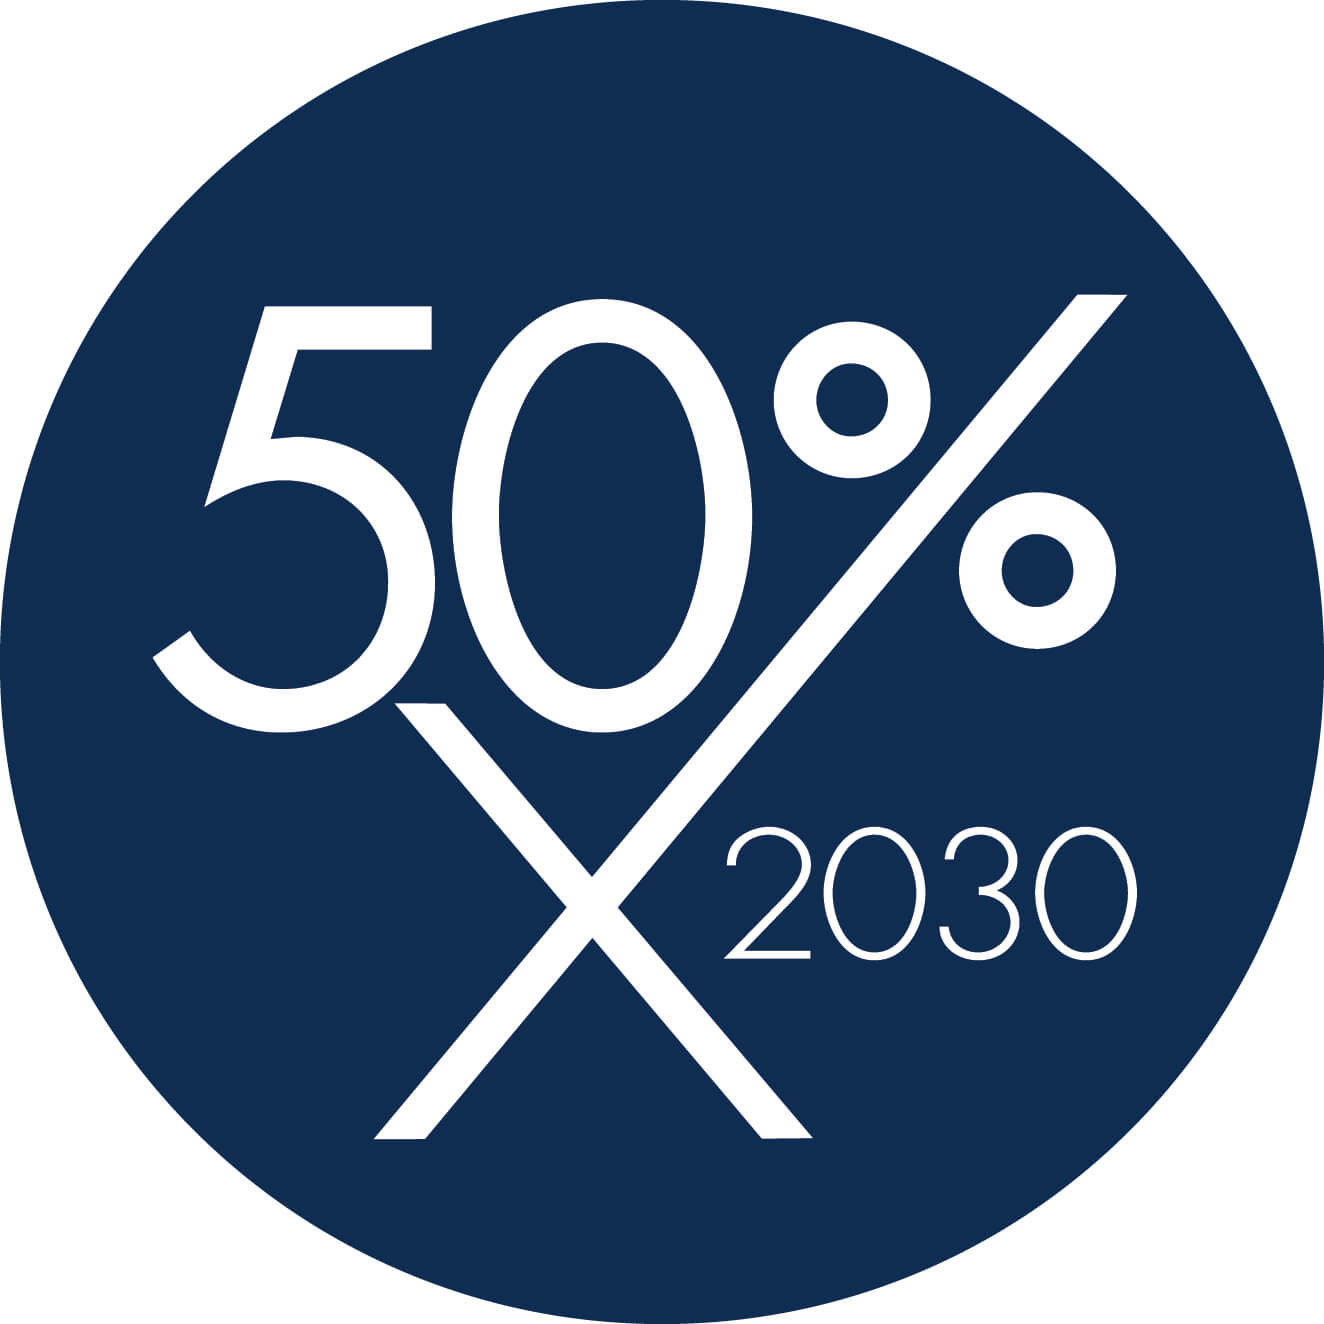 50% by 2030